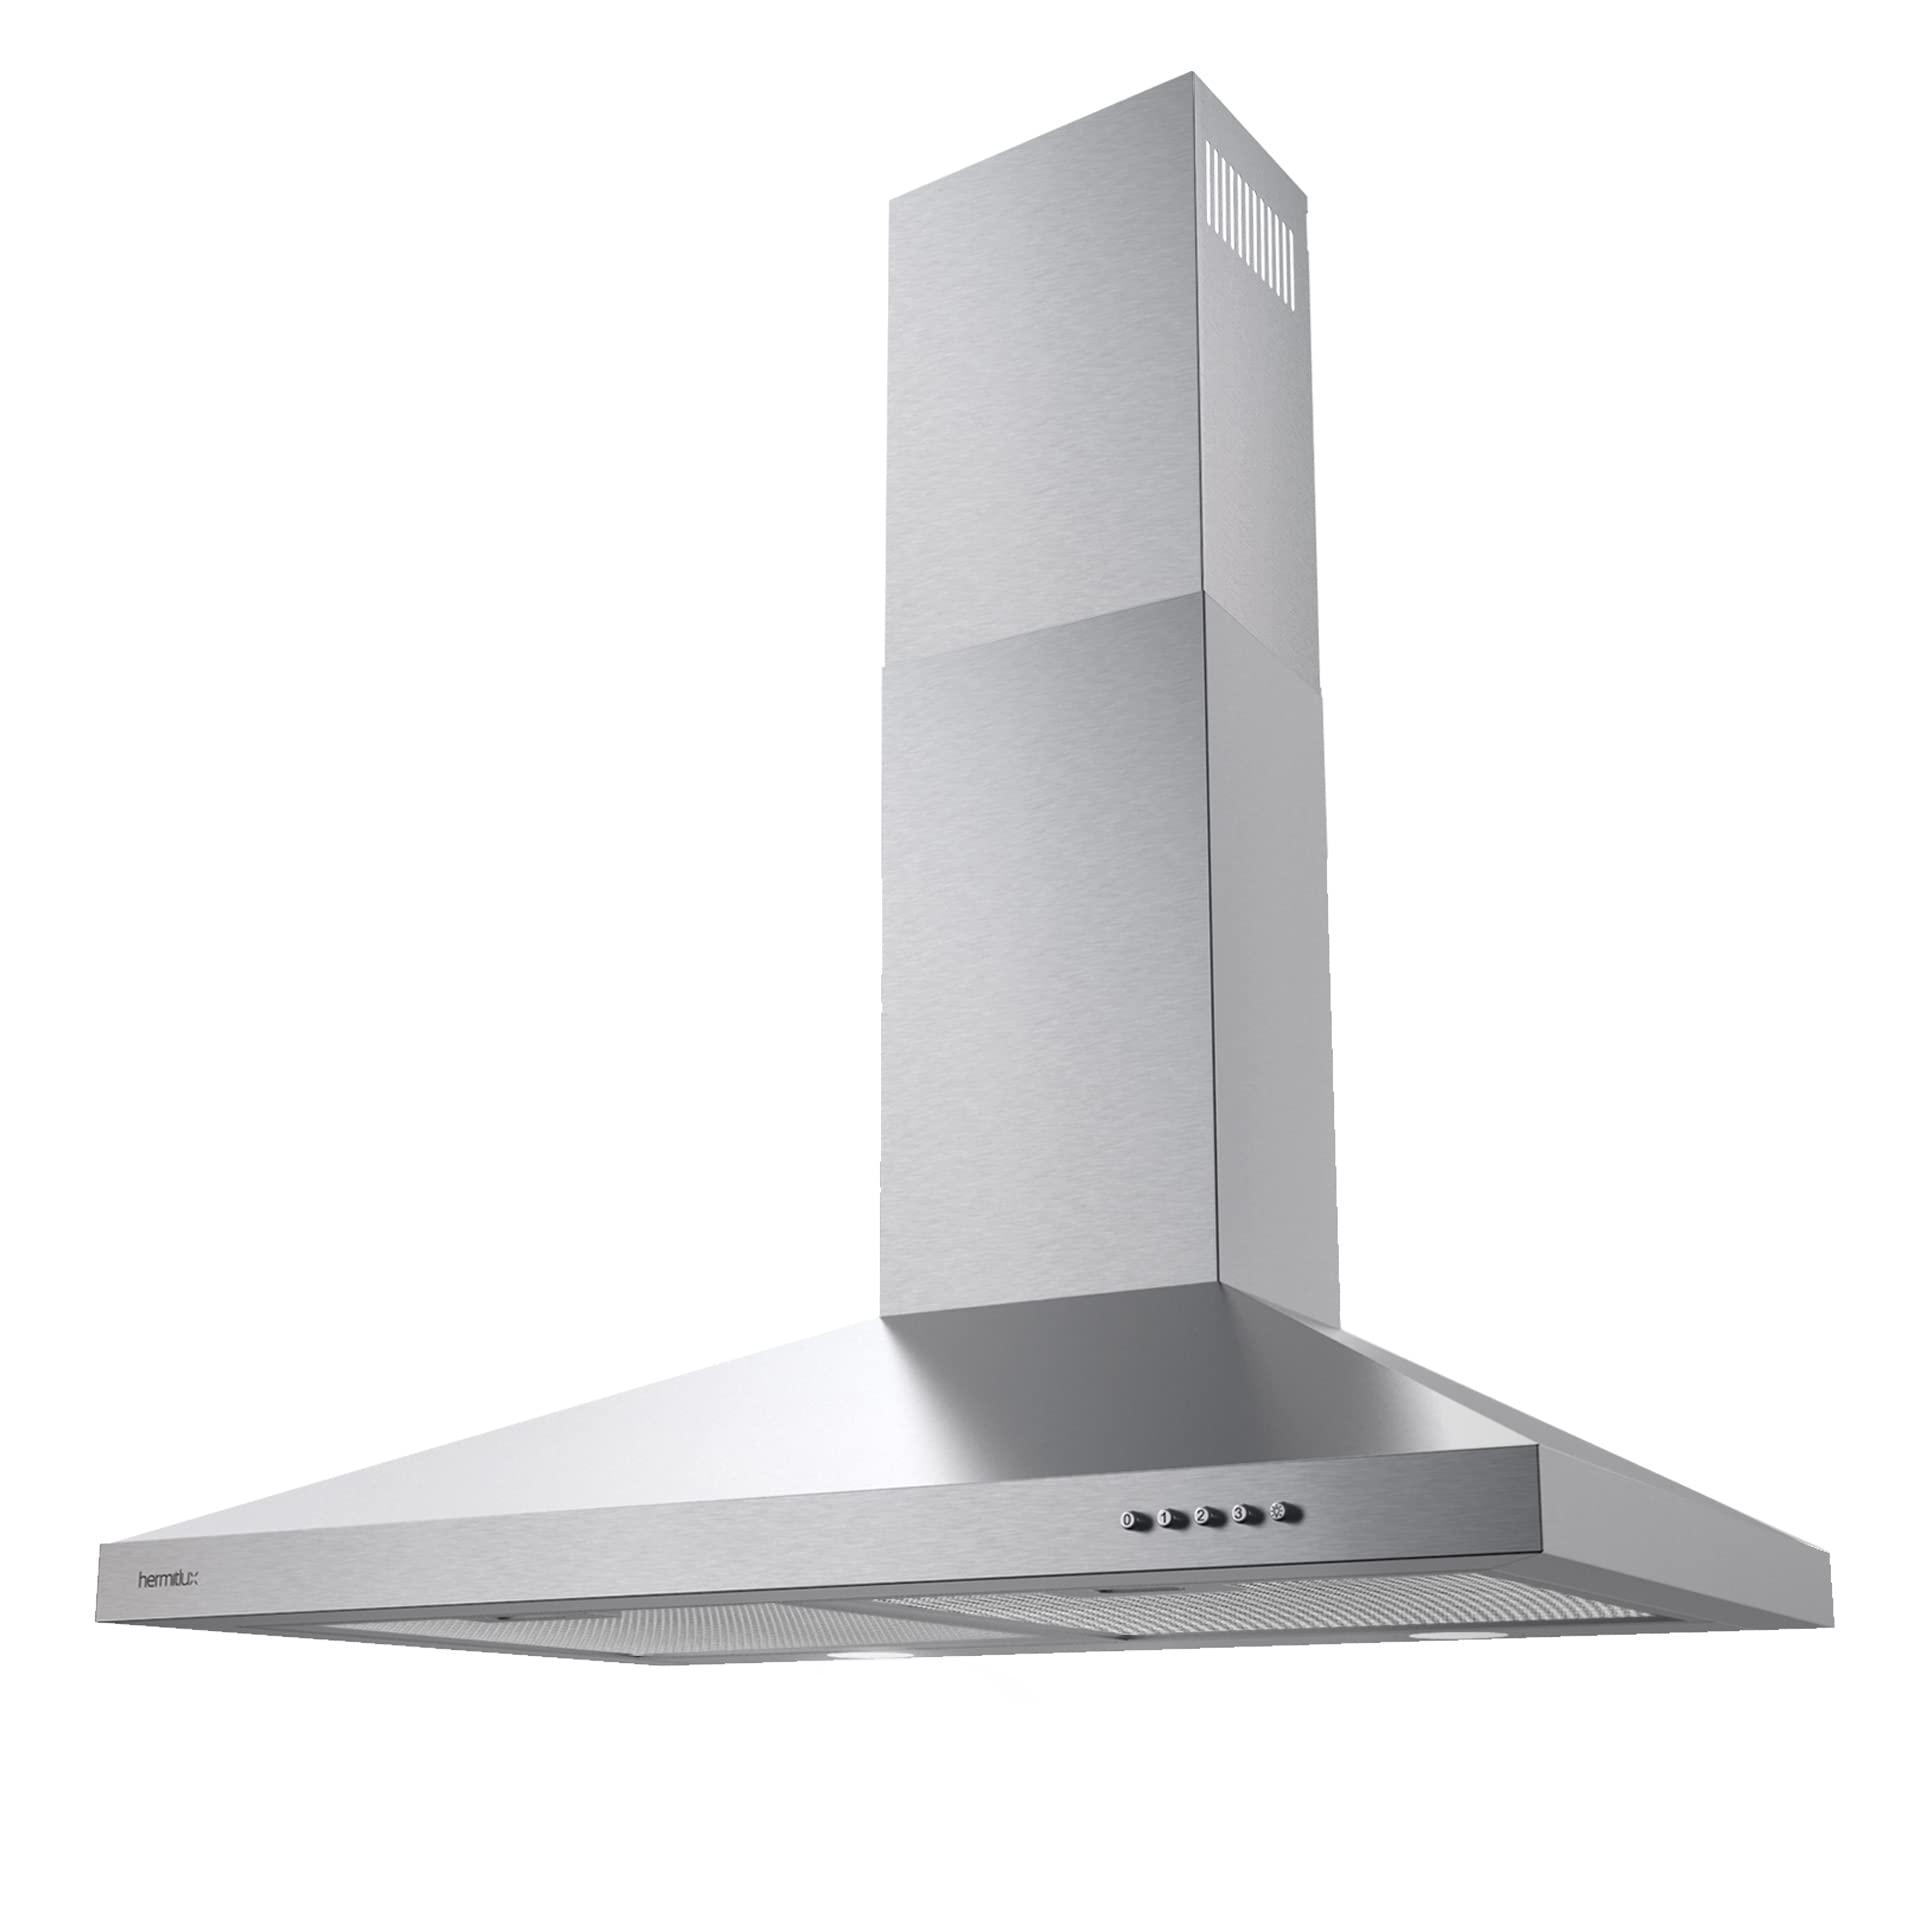 hermitlux range hood 30 inch stainless steel, wall mount vent hood for kitchen with charcoal filter, range hoods with ducted/